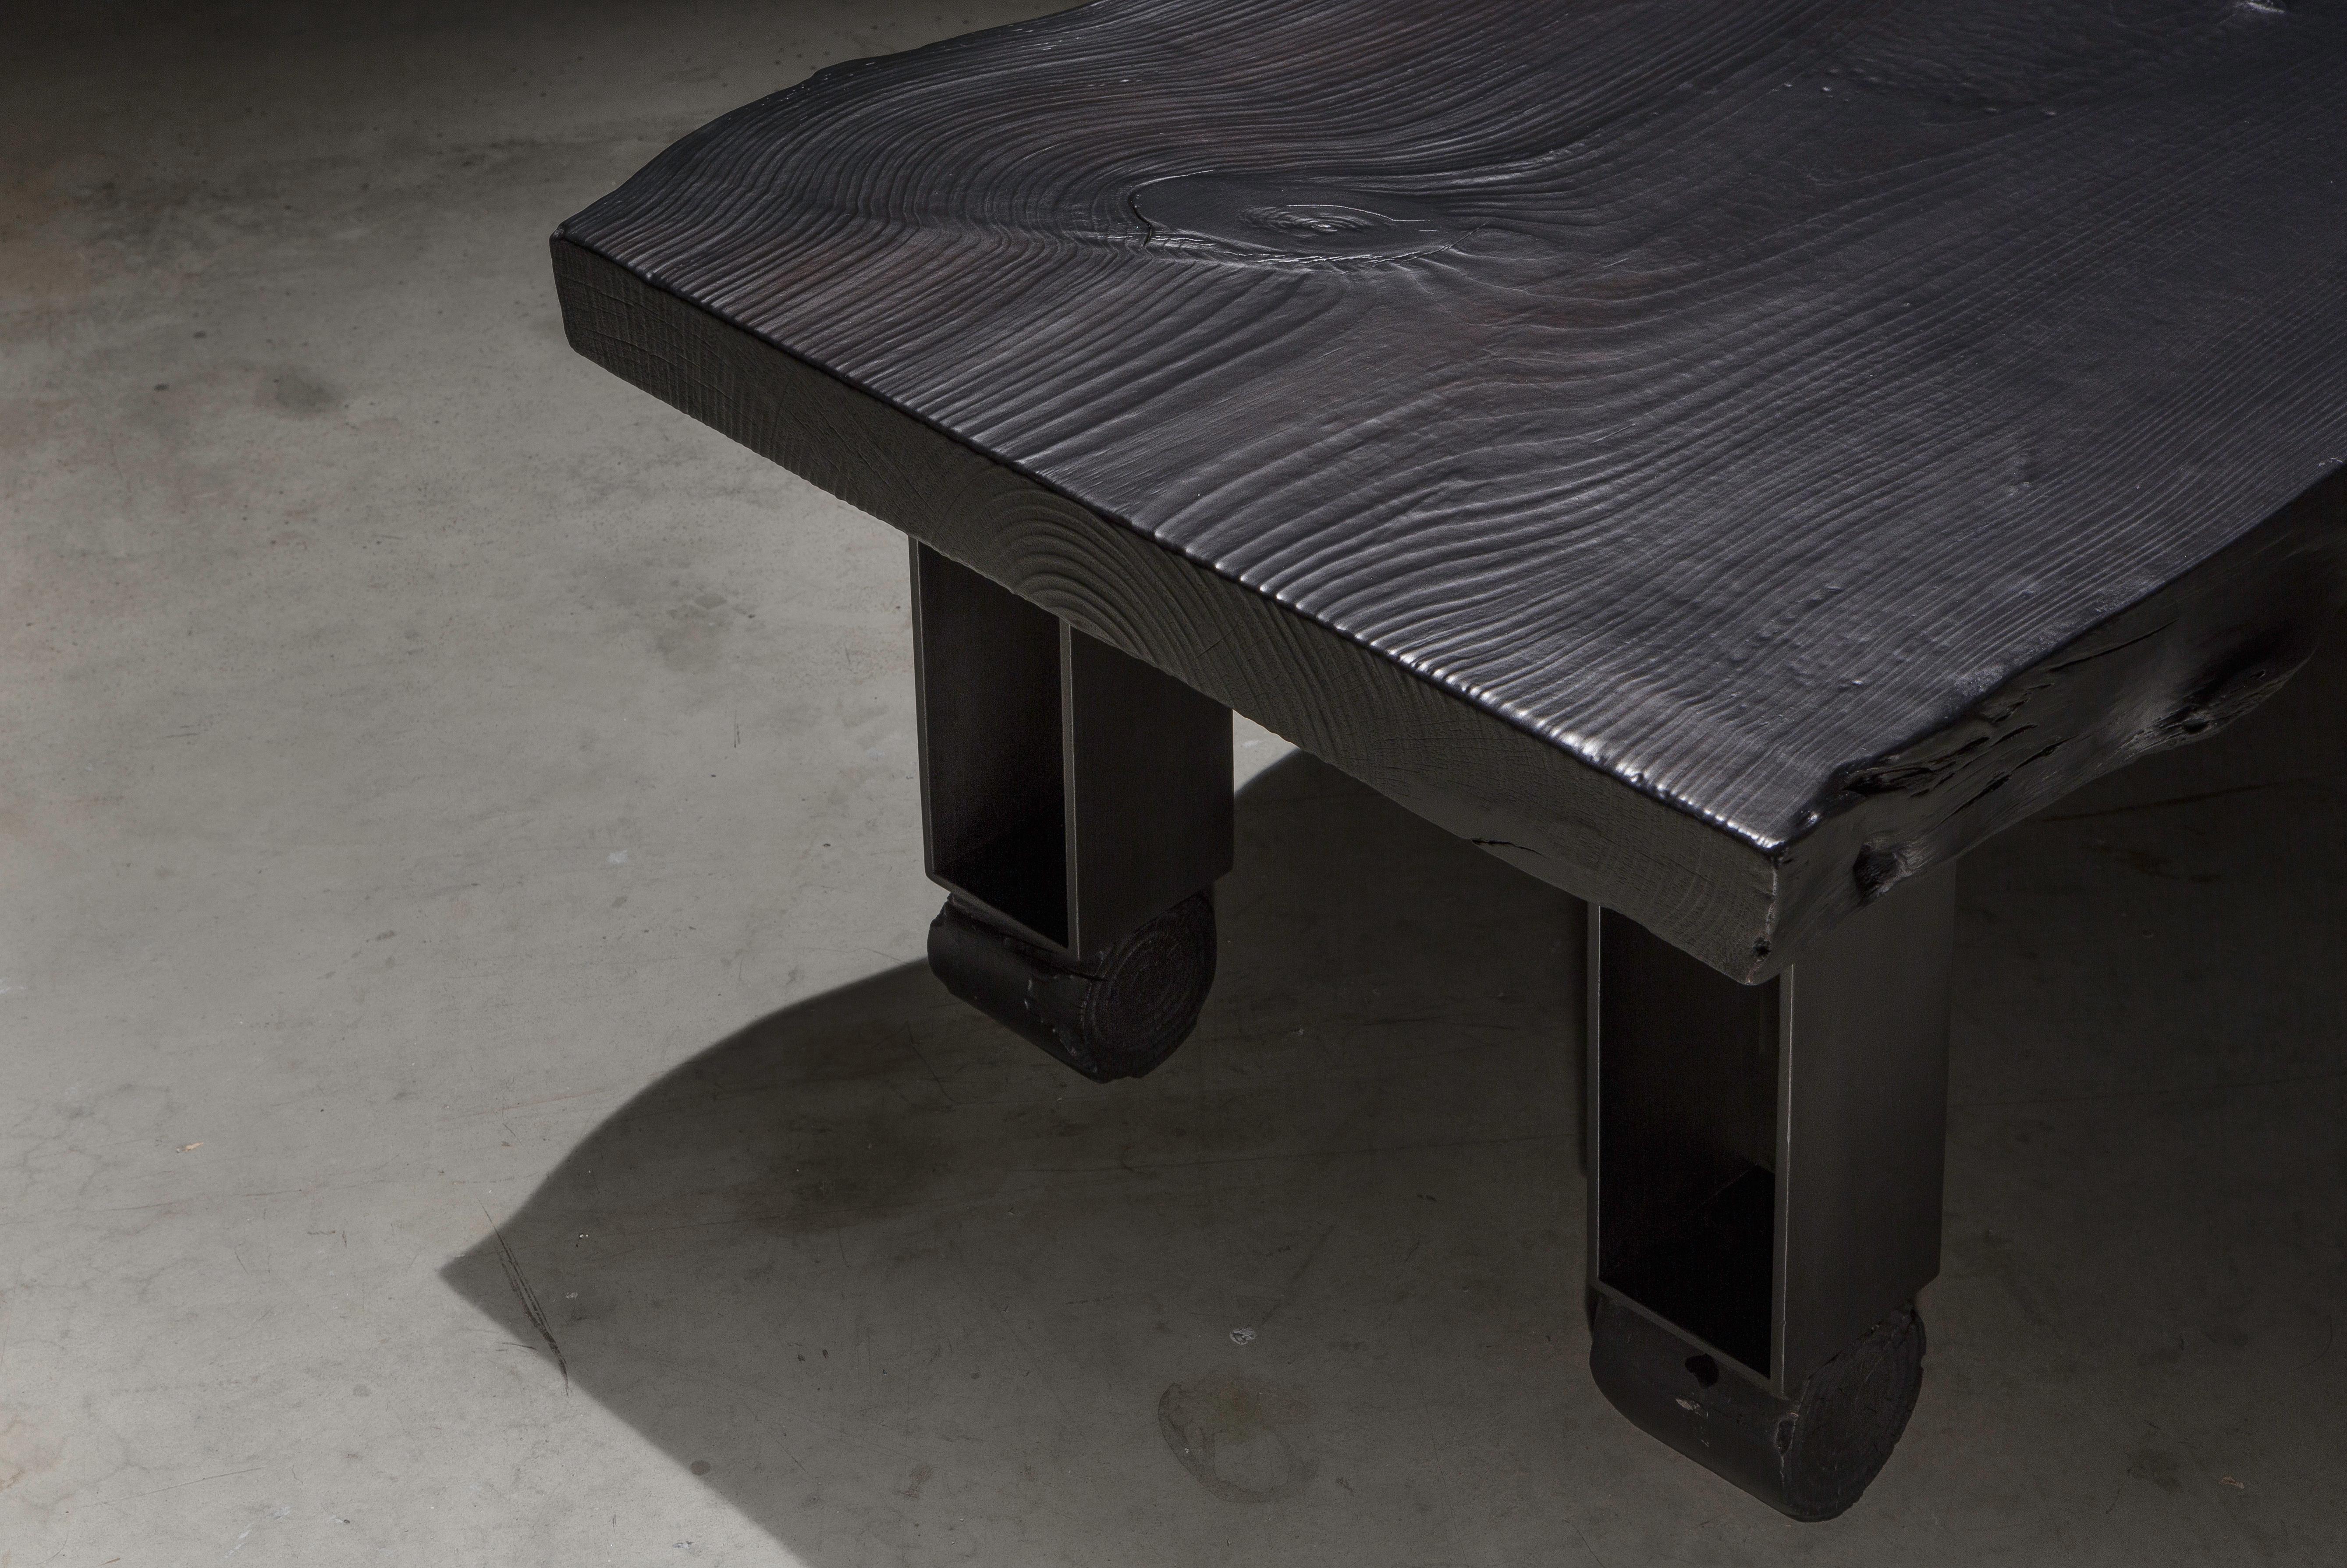 The Willis Coffee table is made of a solid live edge pine slab that has been charred using the traditional Japanese Shou Sugi Ban technique. It is set on top of four solid steel legs with round feet to add geometric style to the table. 

This is a